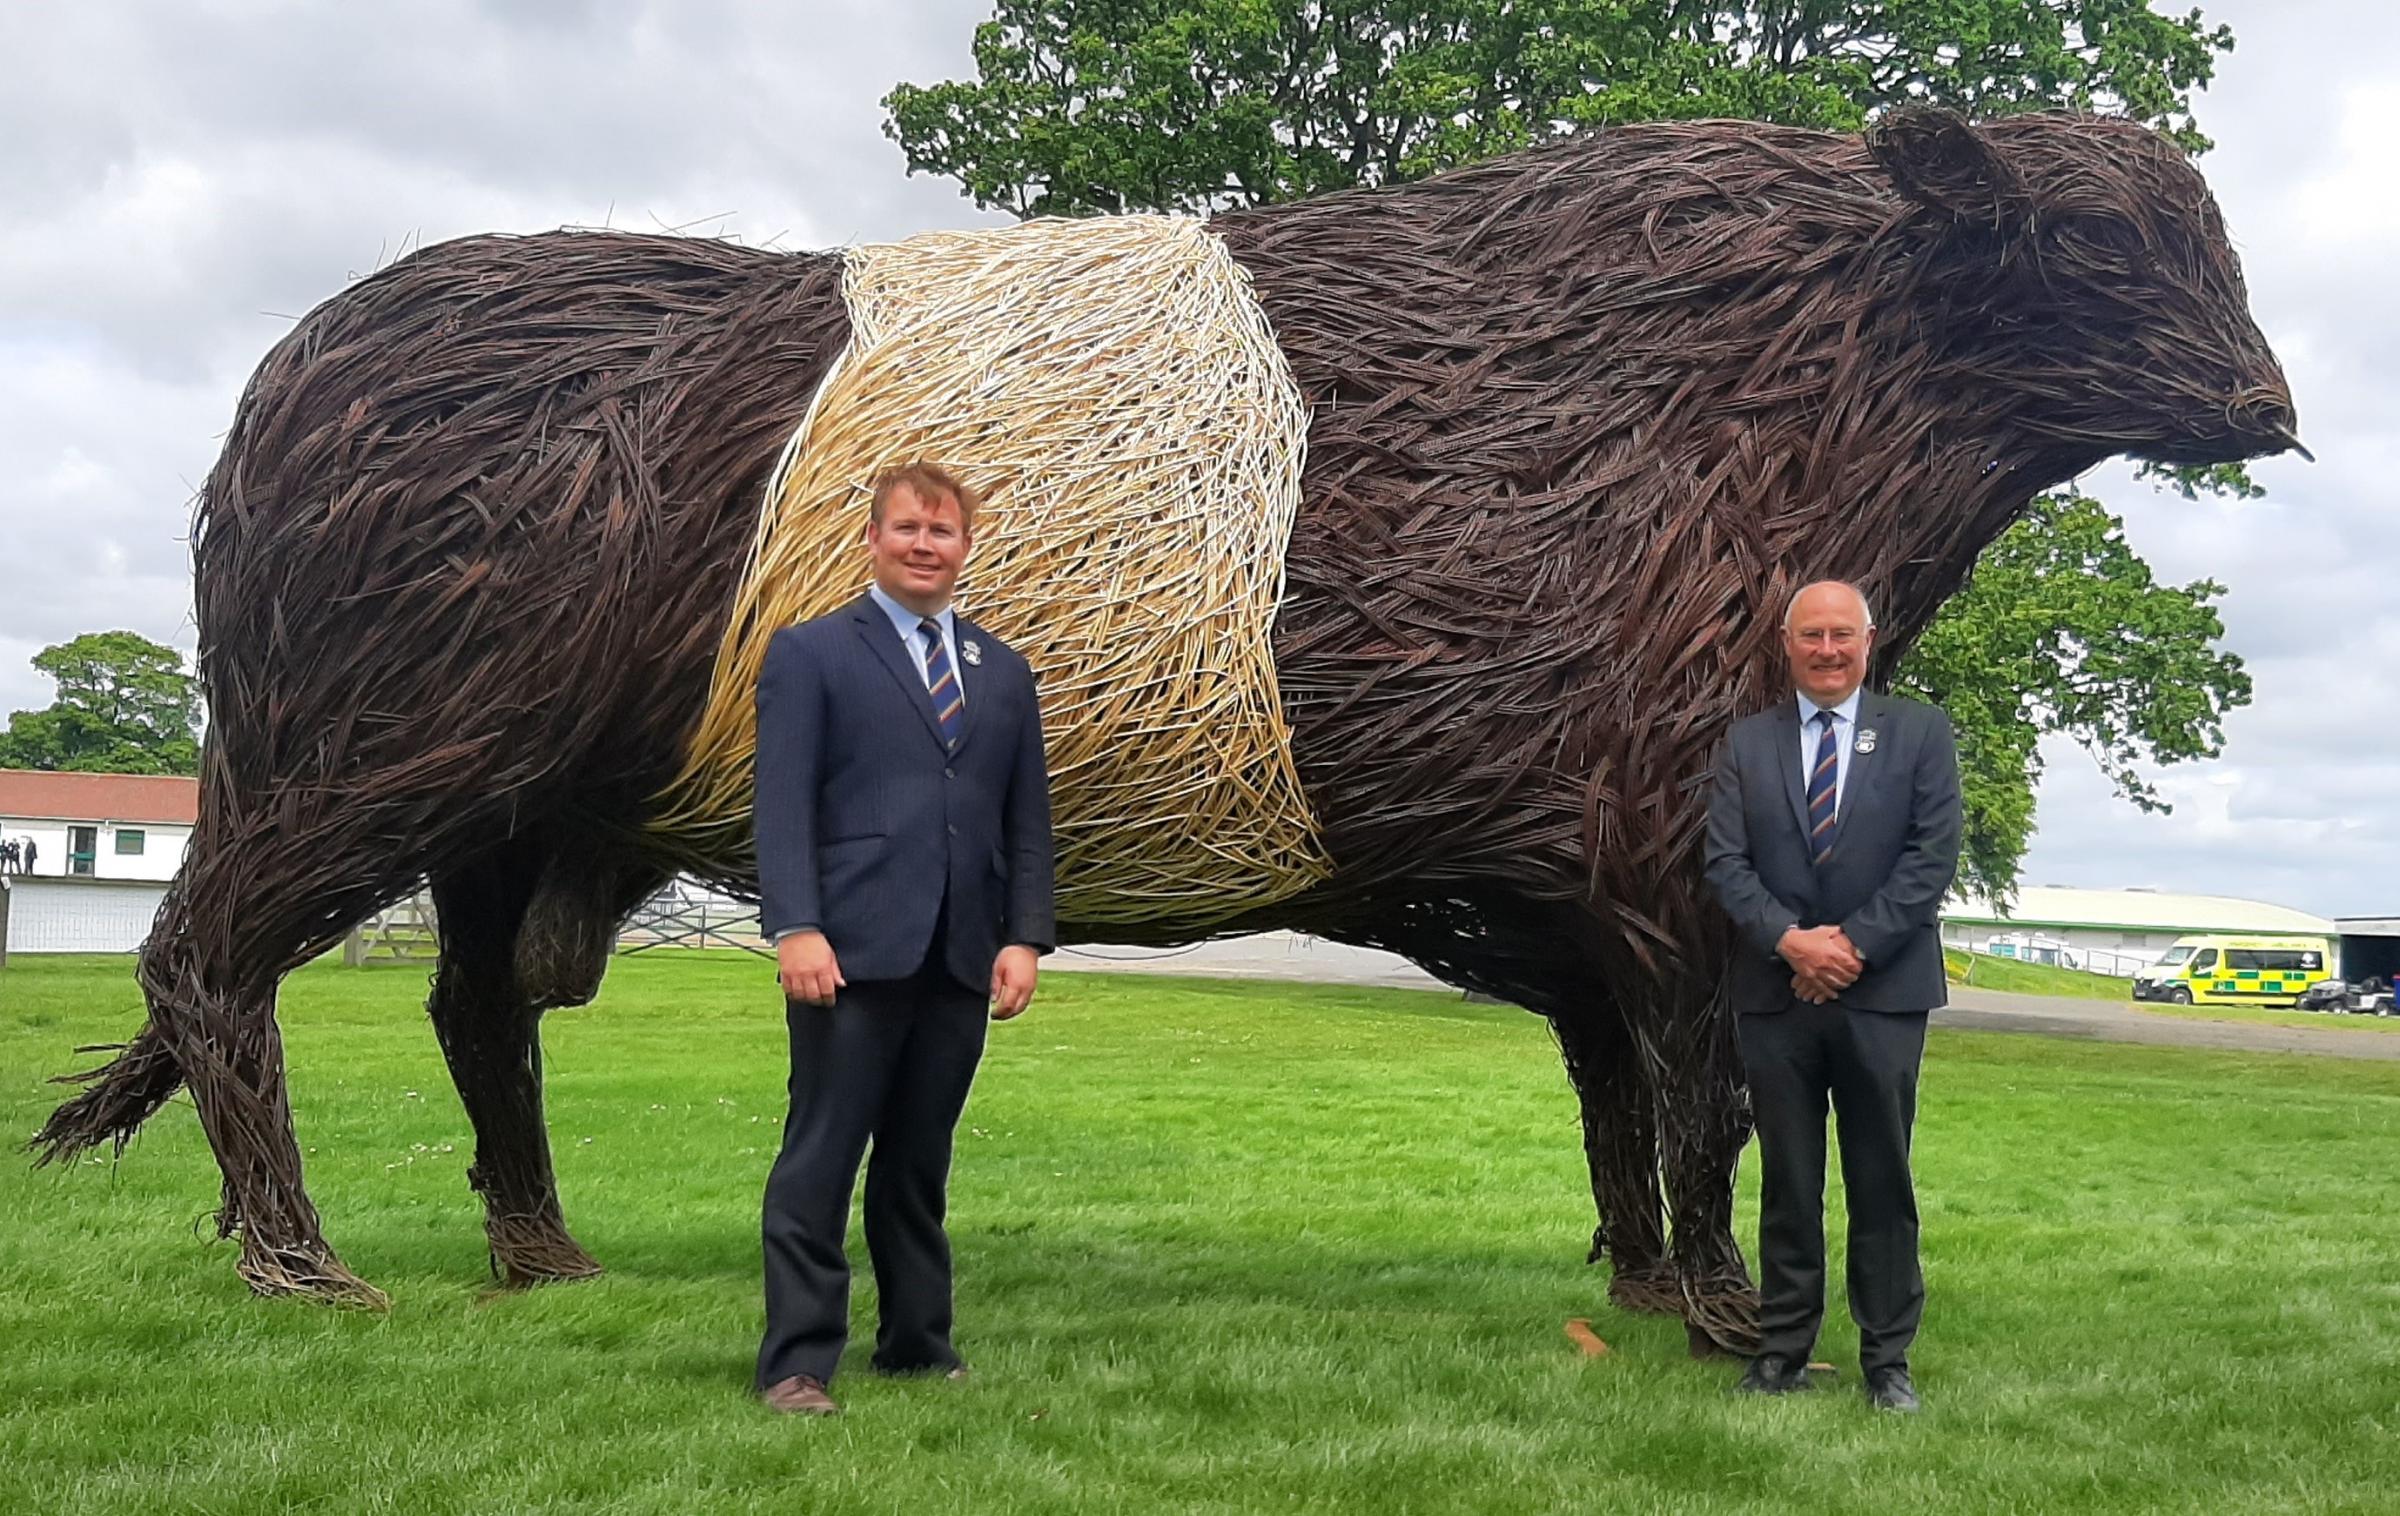 Alan Laidlaw and Bill Gray with a feature of the Showcase outside the new Members Pavilion, a giant Wickerman-style Belted Galloway bull – a reflection on the fact that this was Dumfries and Galloways year of presidency of RHASS